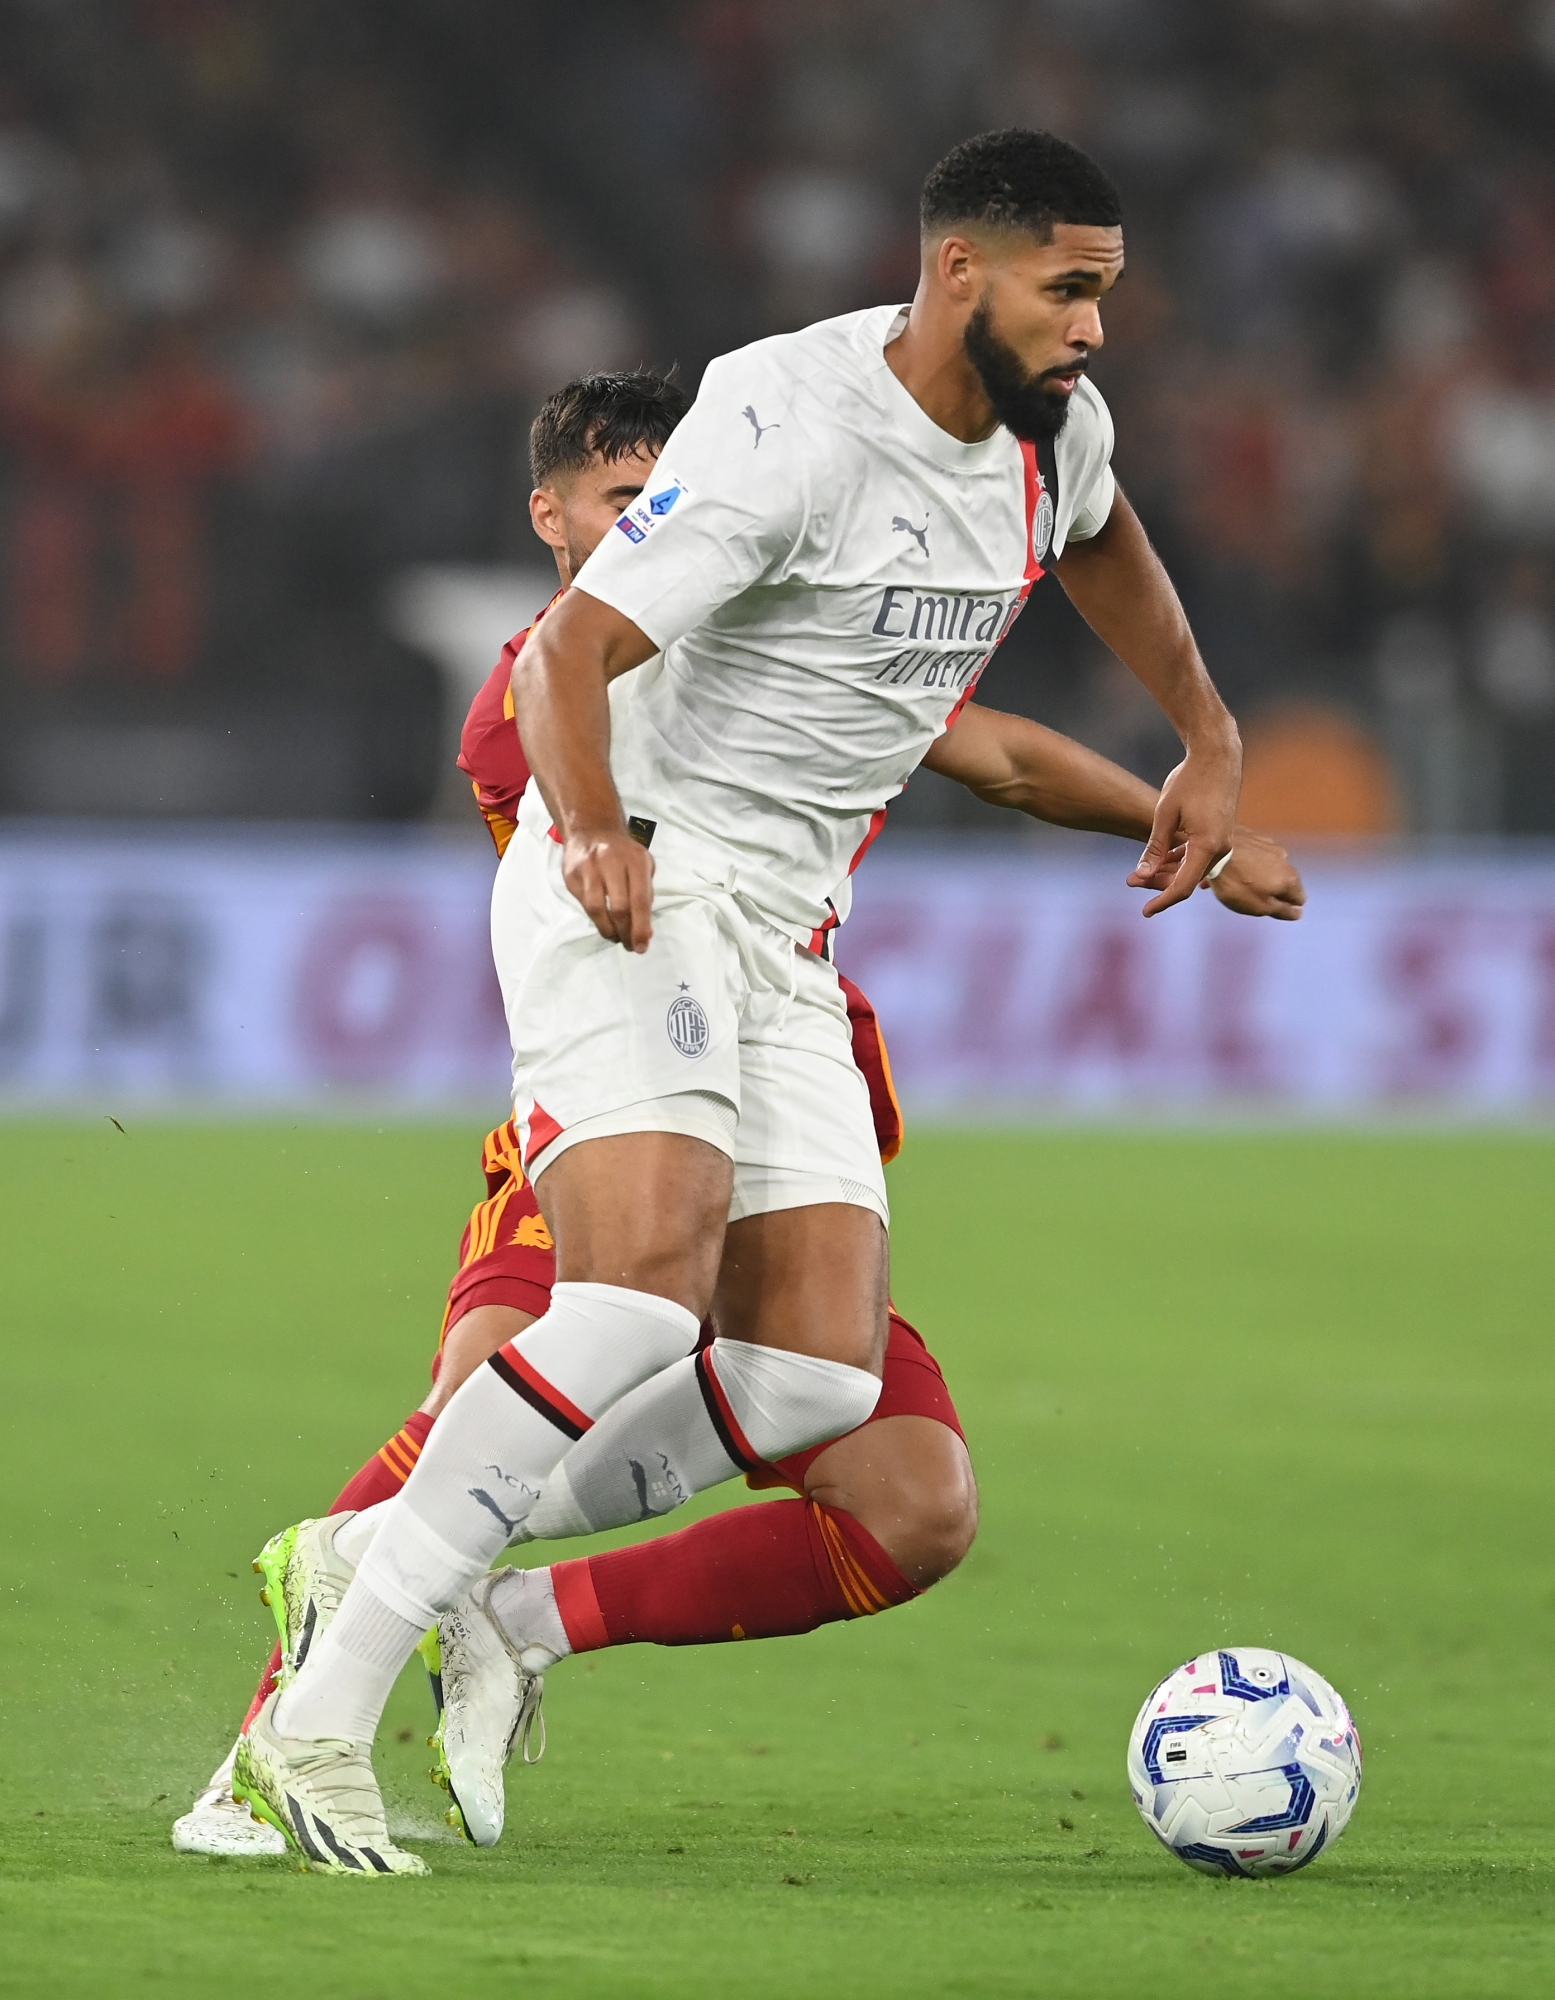 ROME, ITALY - SEPTEMBER 01: Ruben Loftus Cheek of AC Milan in action during the Serie A TIM match between AS Roma and AC Milan at Stadio Olimpico on September 01, 2023 in Rome, Italy. (Photo by Claudio Villa/AC Milan via Getty Images)